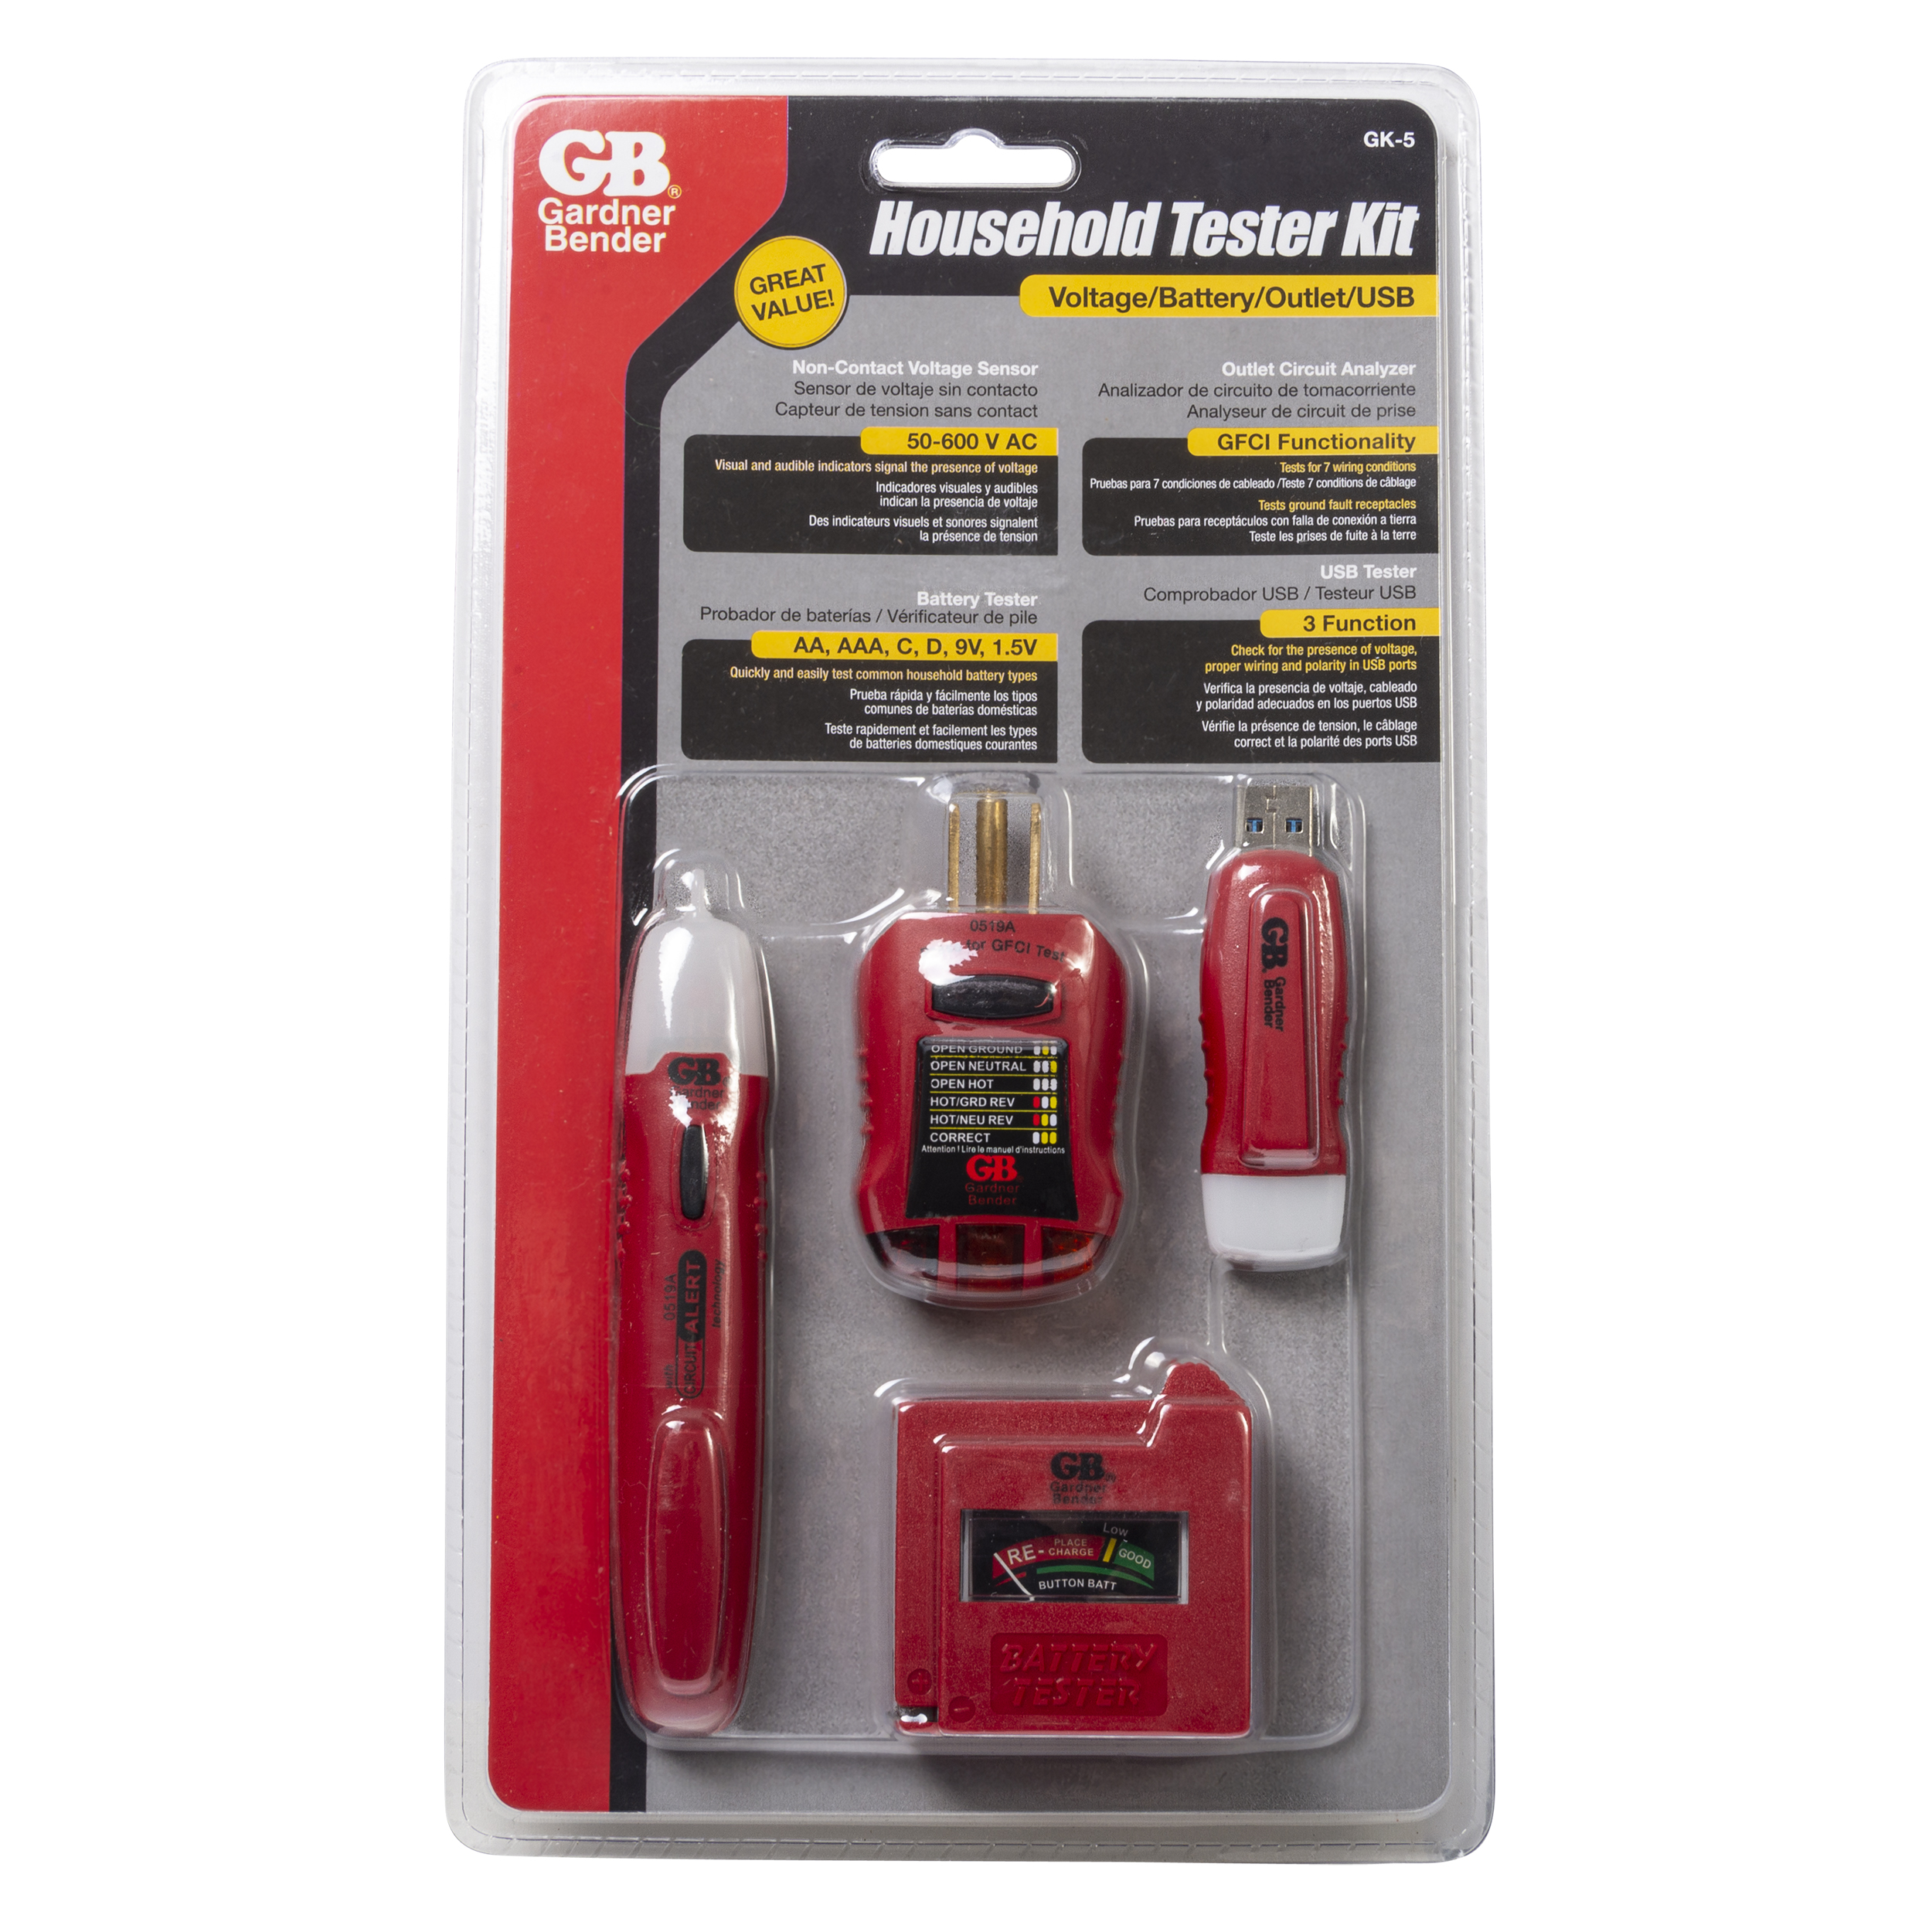 GB GK-5 Electrical Tester Kit, 4-Piece, Plastic, Red - 2